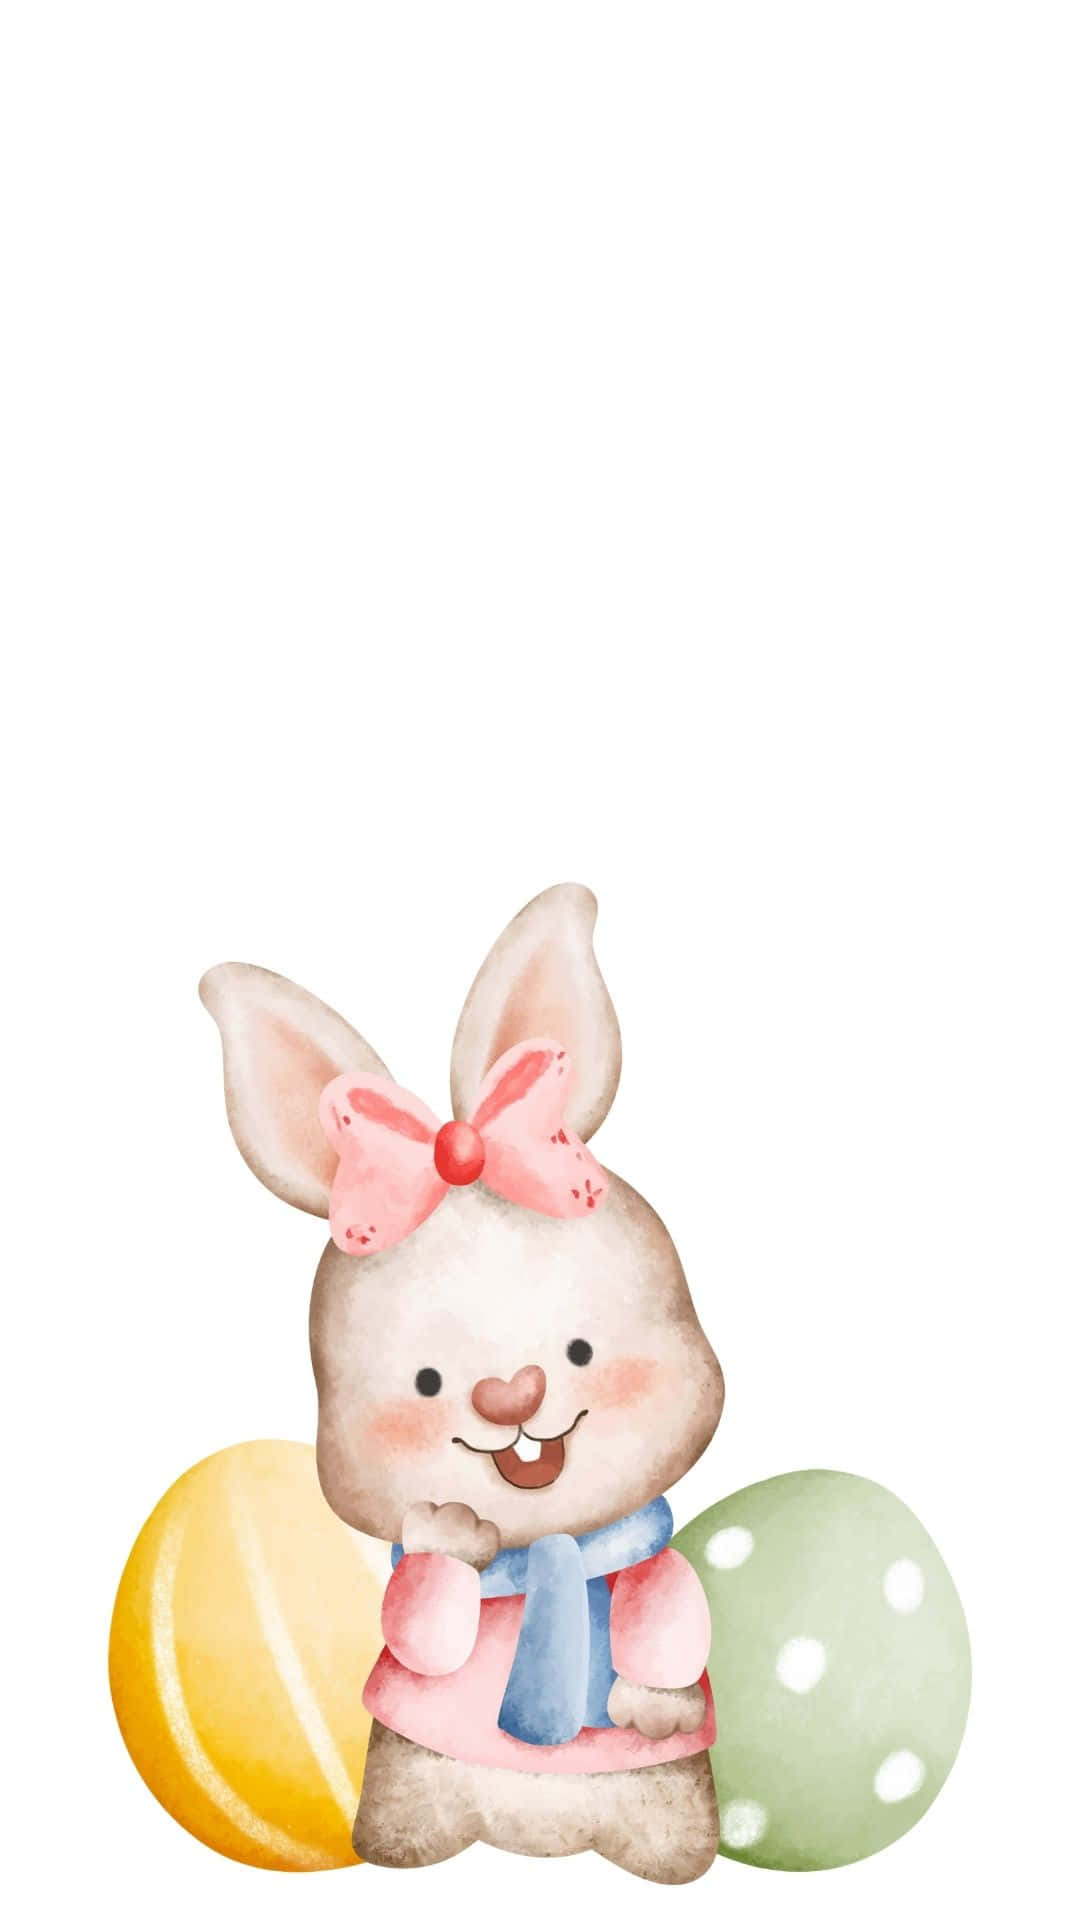 The Easter Bunny Is Ready To Deliver Easter Cheer! Background